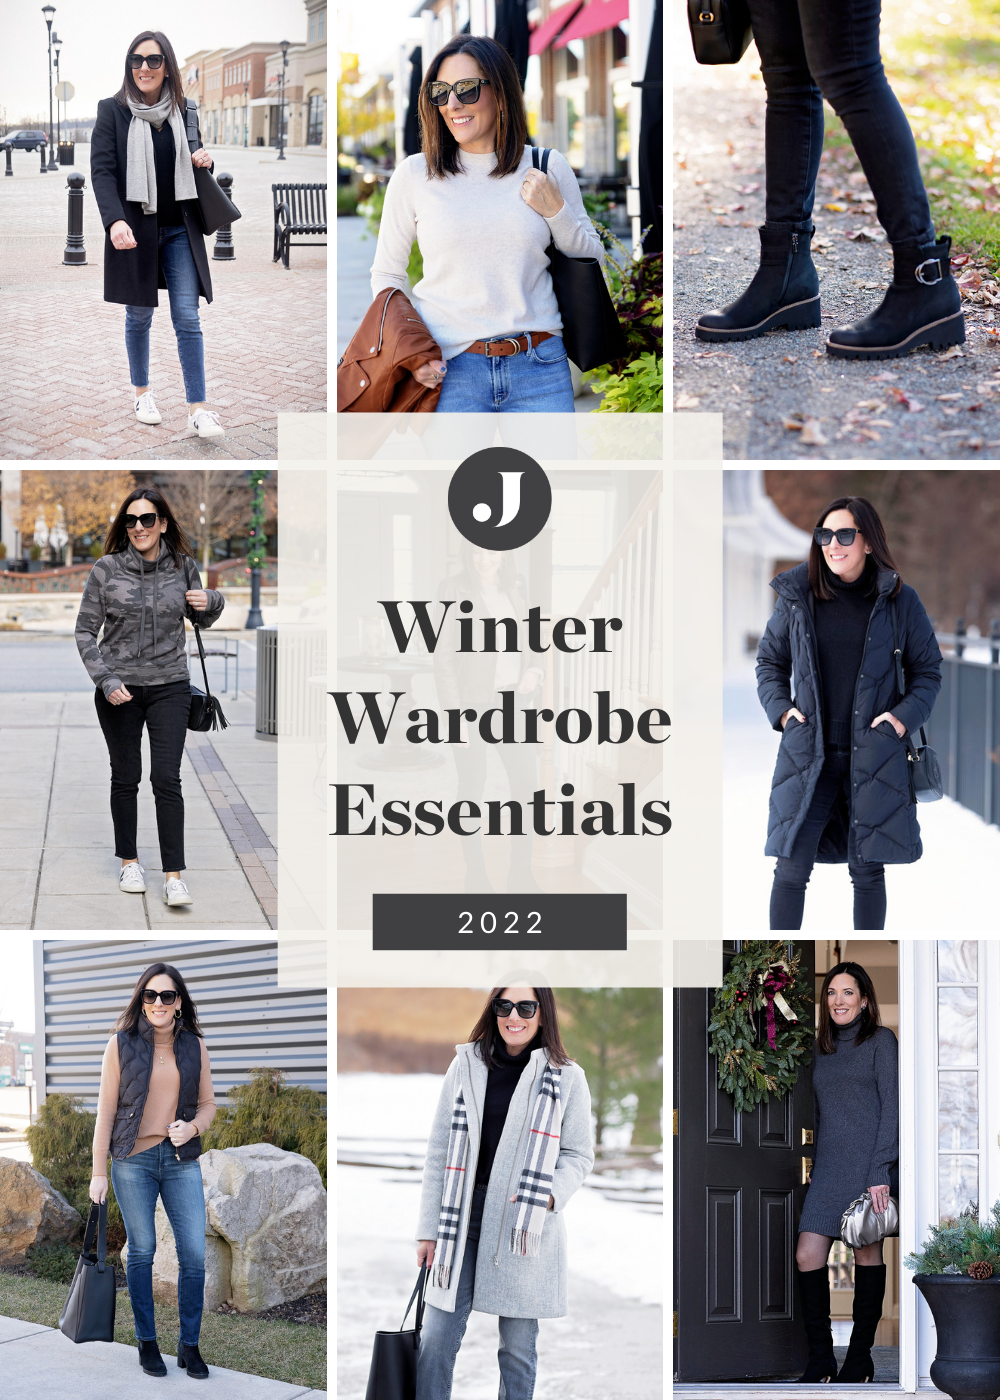 I've updated my Winter Wardrobe Essentials for 2022! These are what I consider the basic building blocks to a stylish and workable winter wardrobe.